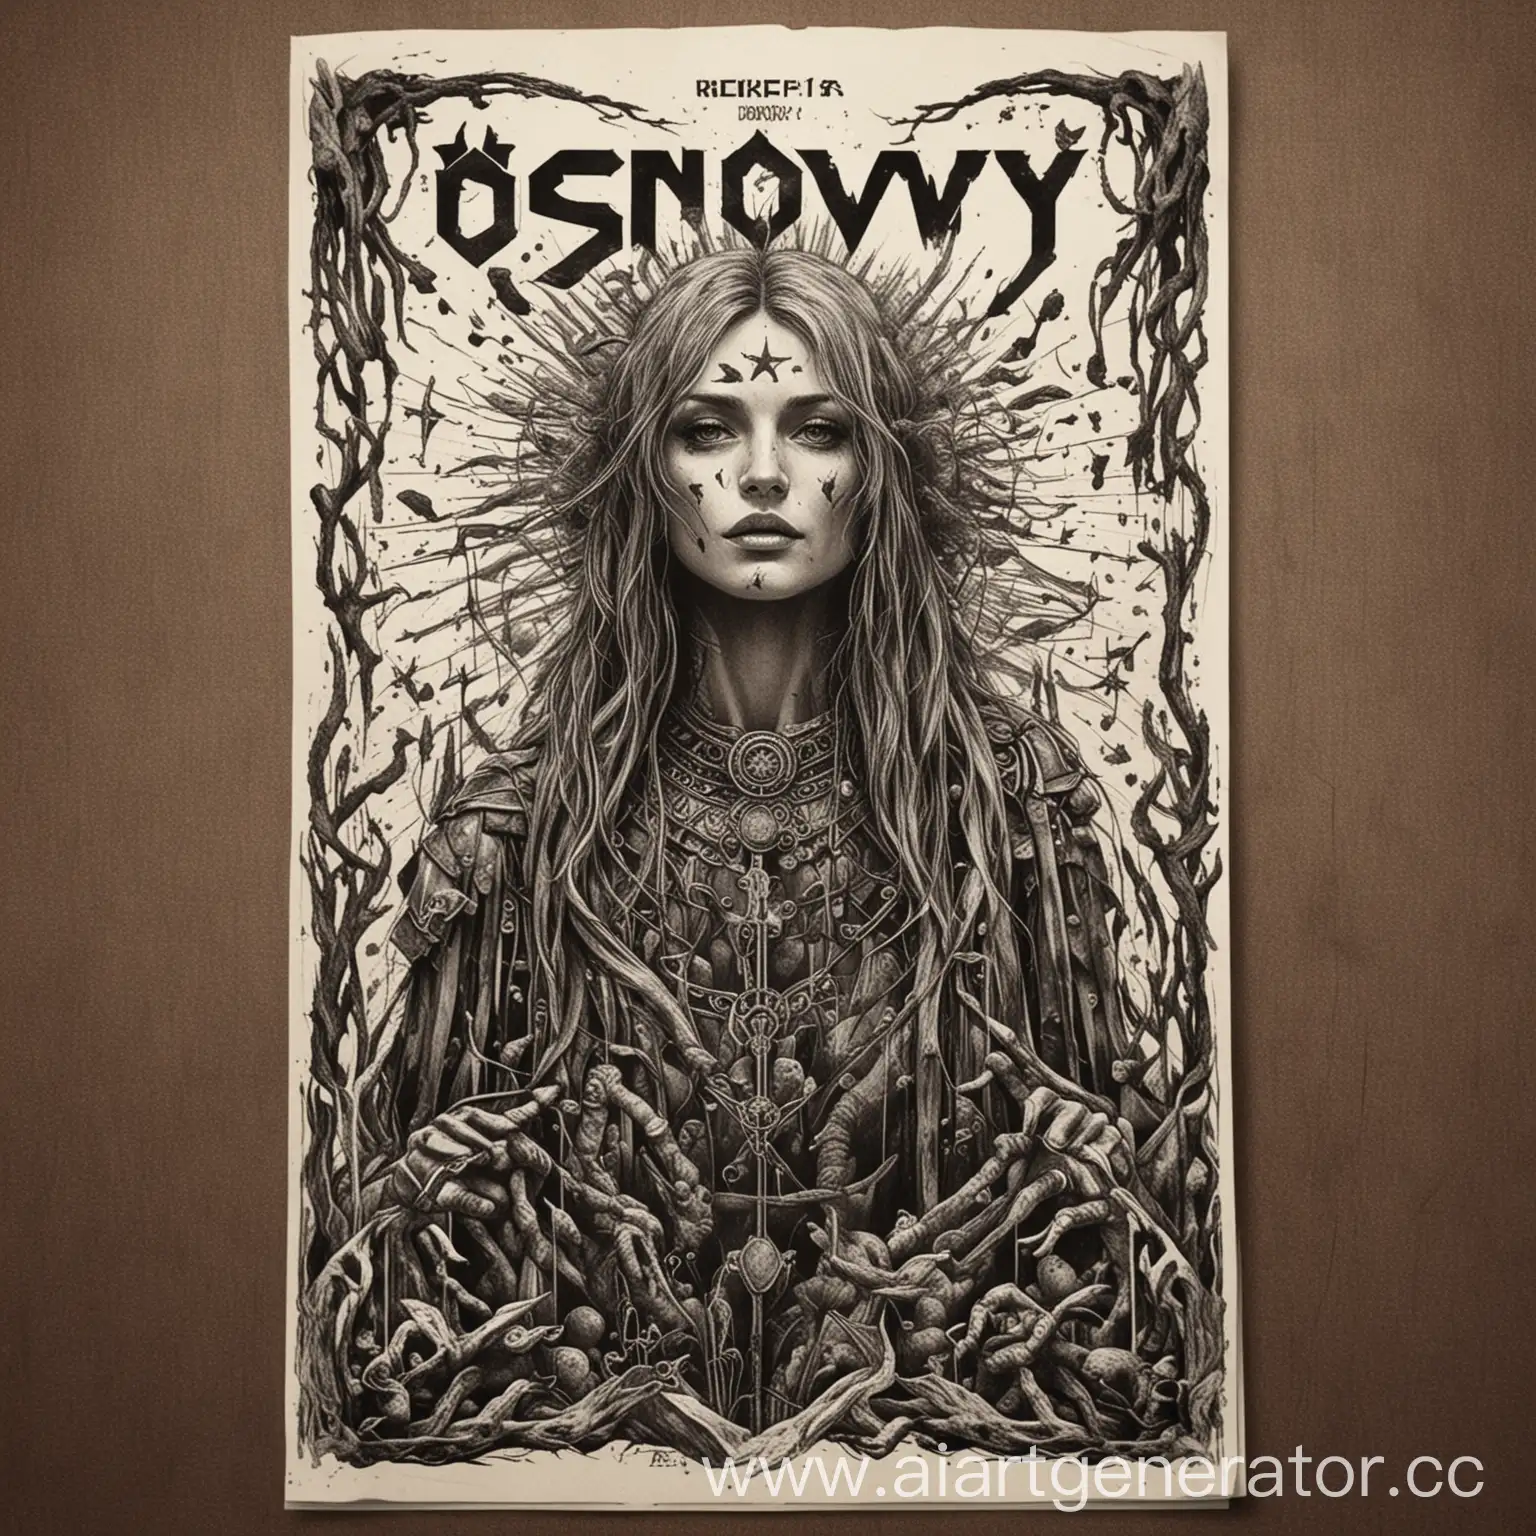 Energetic-Performance-Poster-for-Rock-Group-Sosnovy-Bor